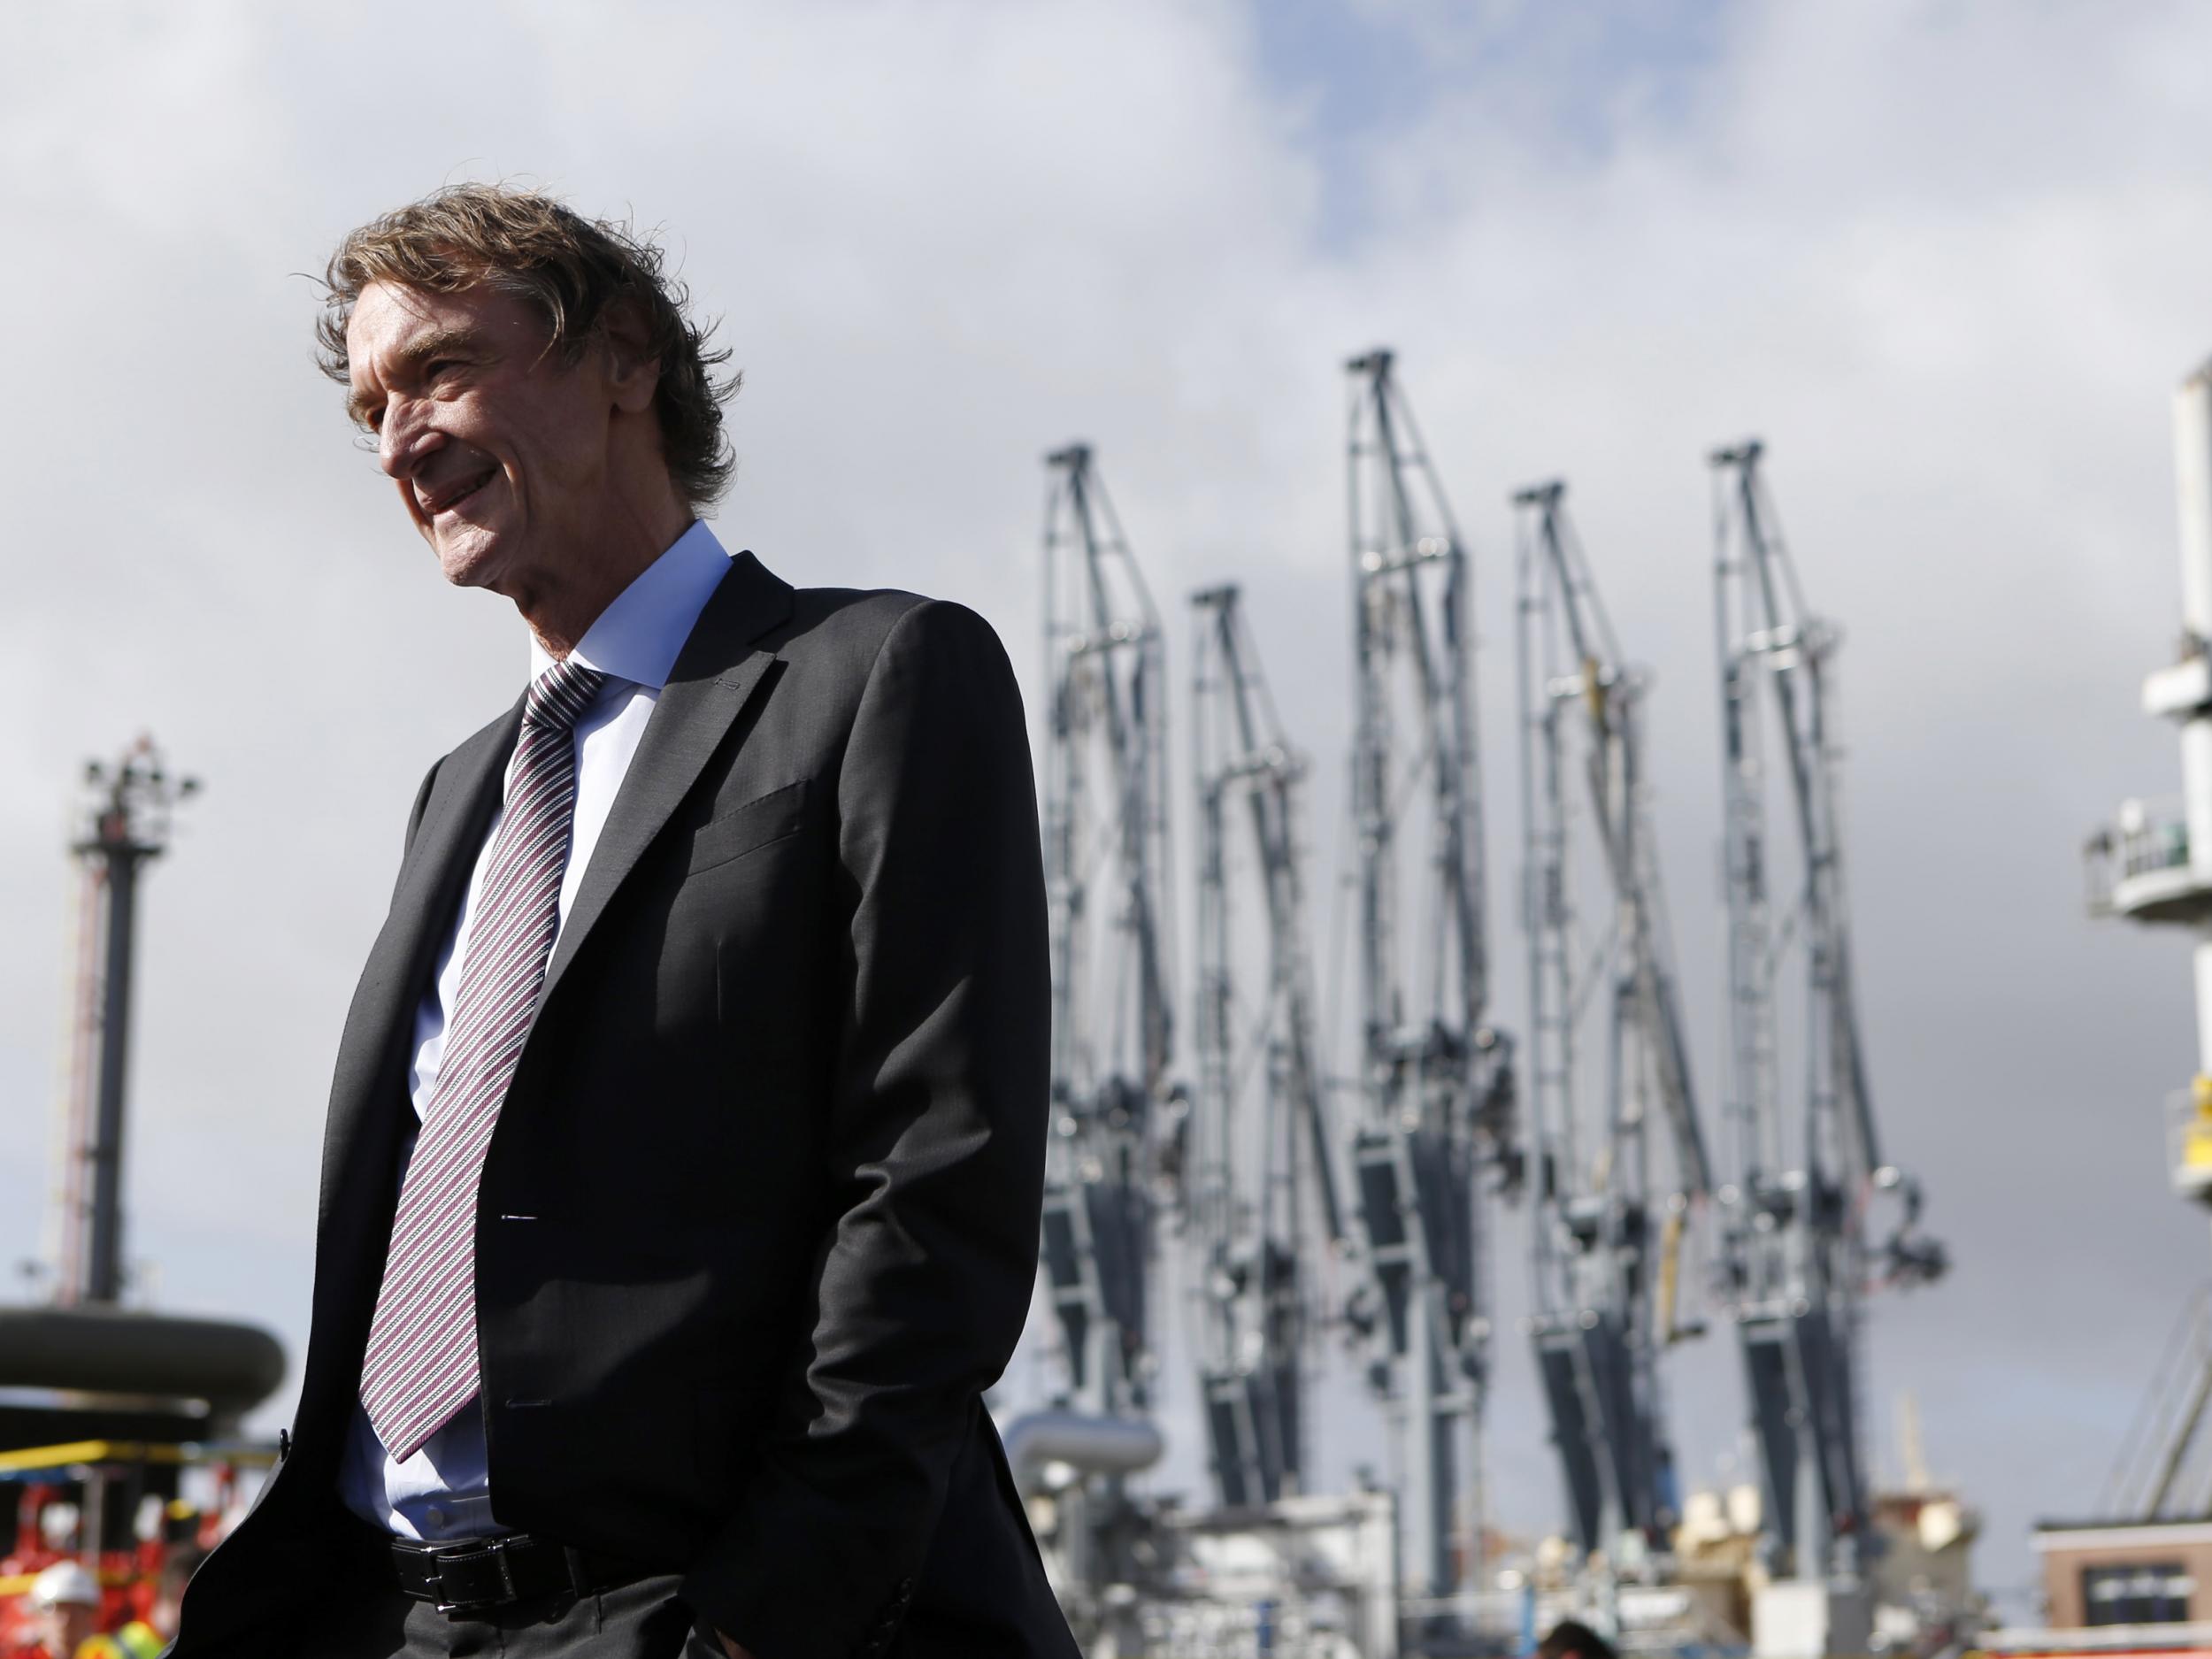 Ineos founder and CEO Jim Ratcliffe has been named as the richest man in the UK